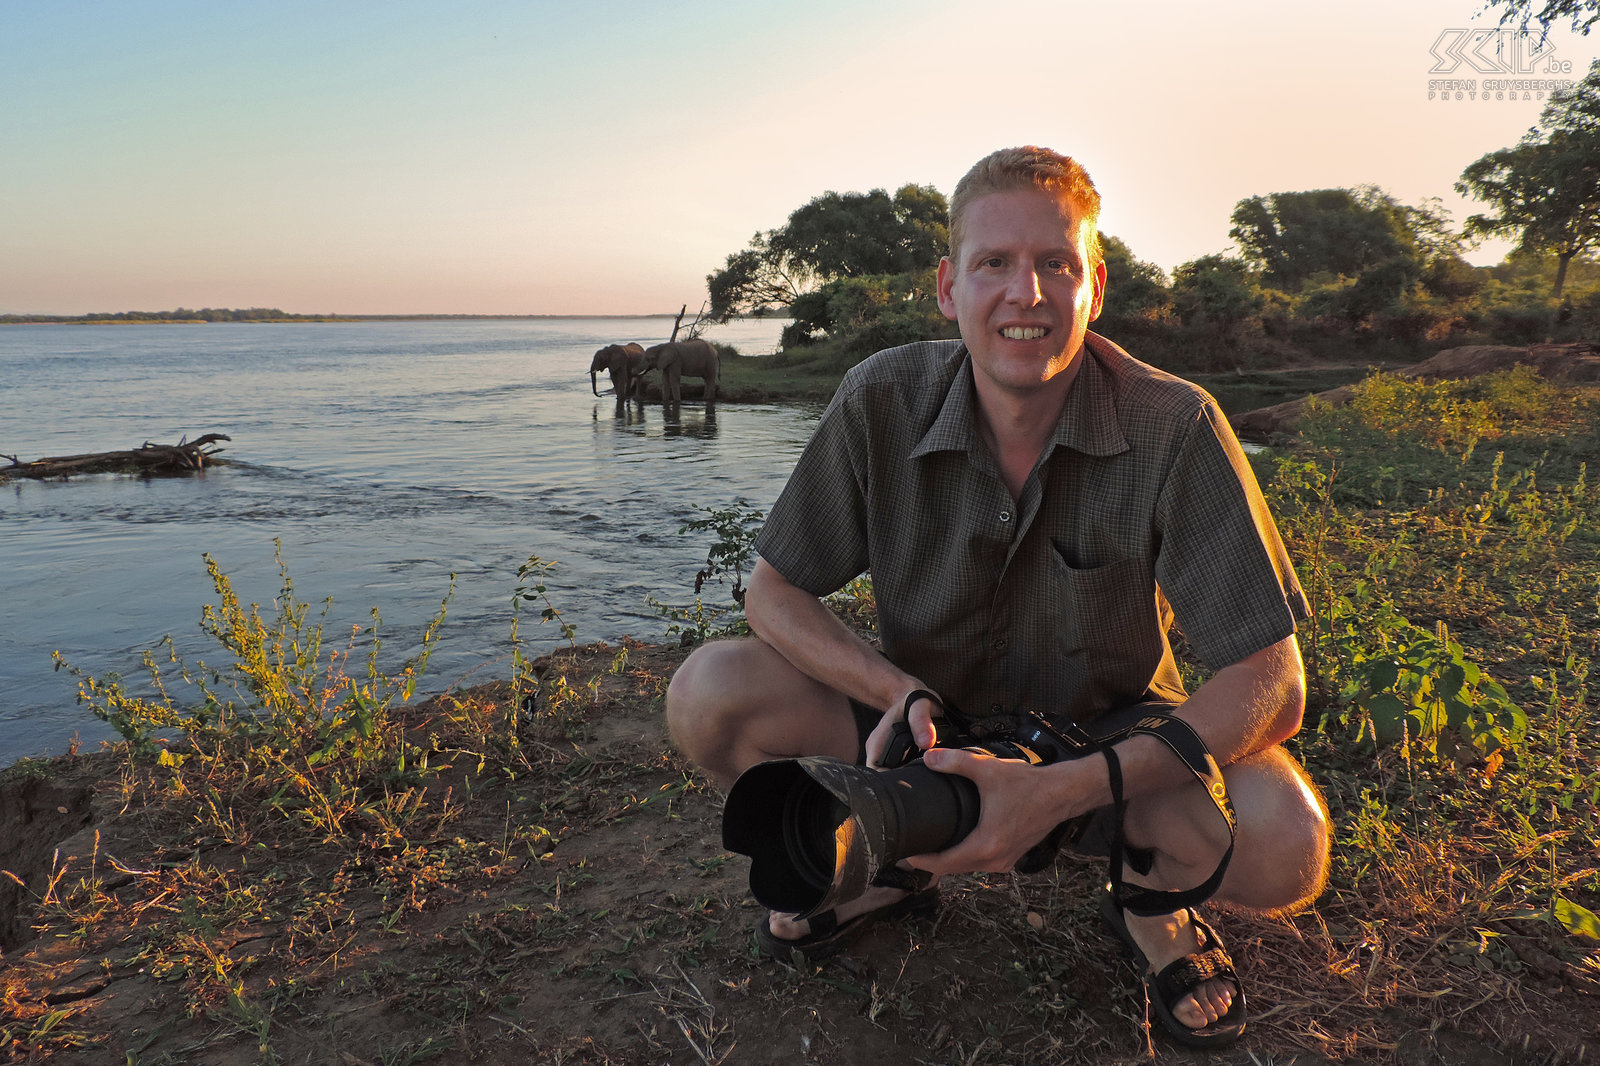 Lower Zambezi - Stefan with elephants 50 meters from our tents, we saw a family of elephants. Two elephants came down to the river to drink. At night a hippo grazed near our tent and some hyenas came very close to take a look. Stefan Cruysberghs